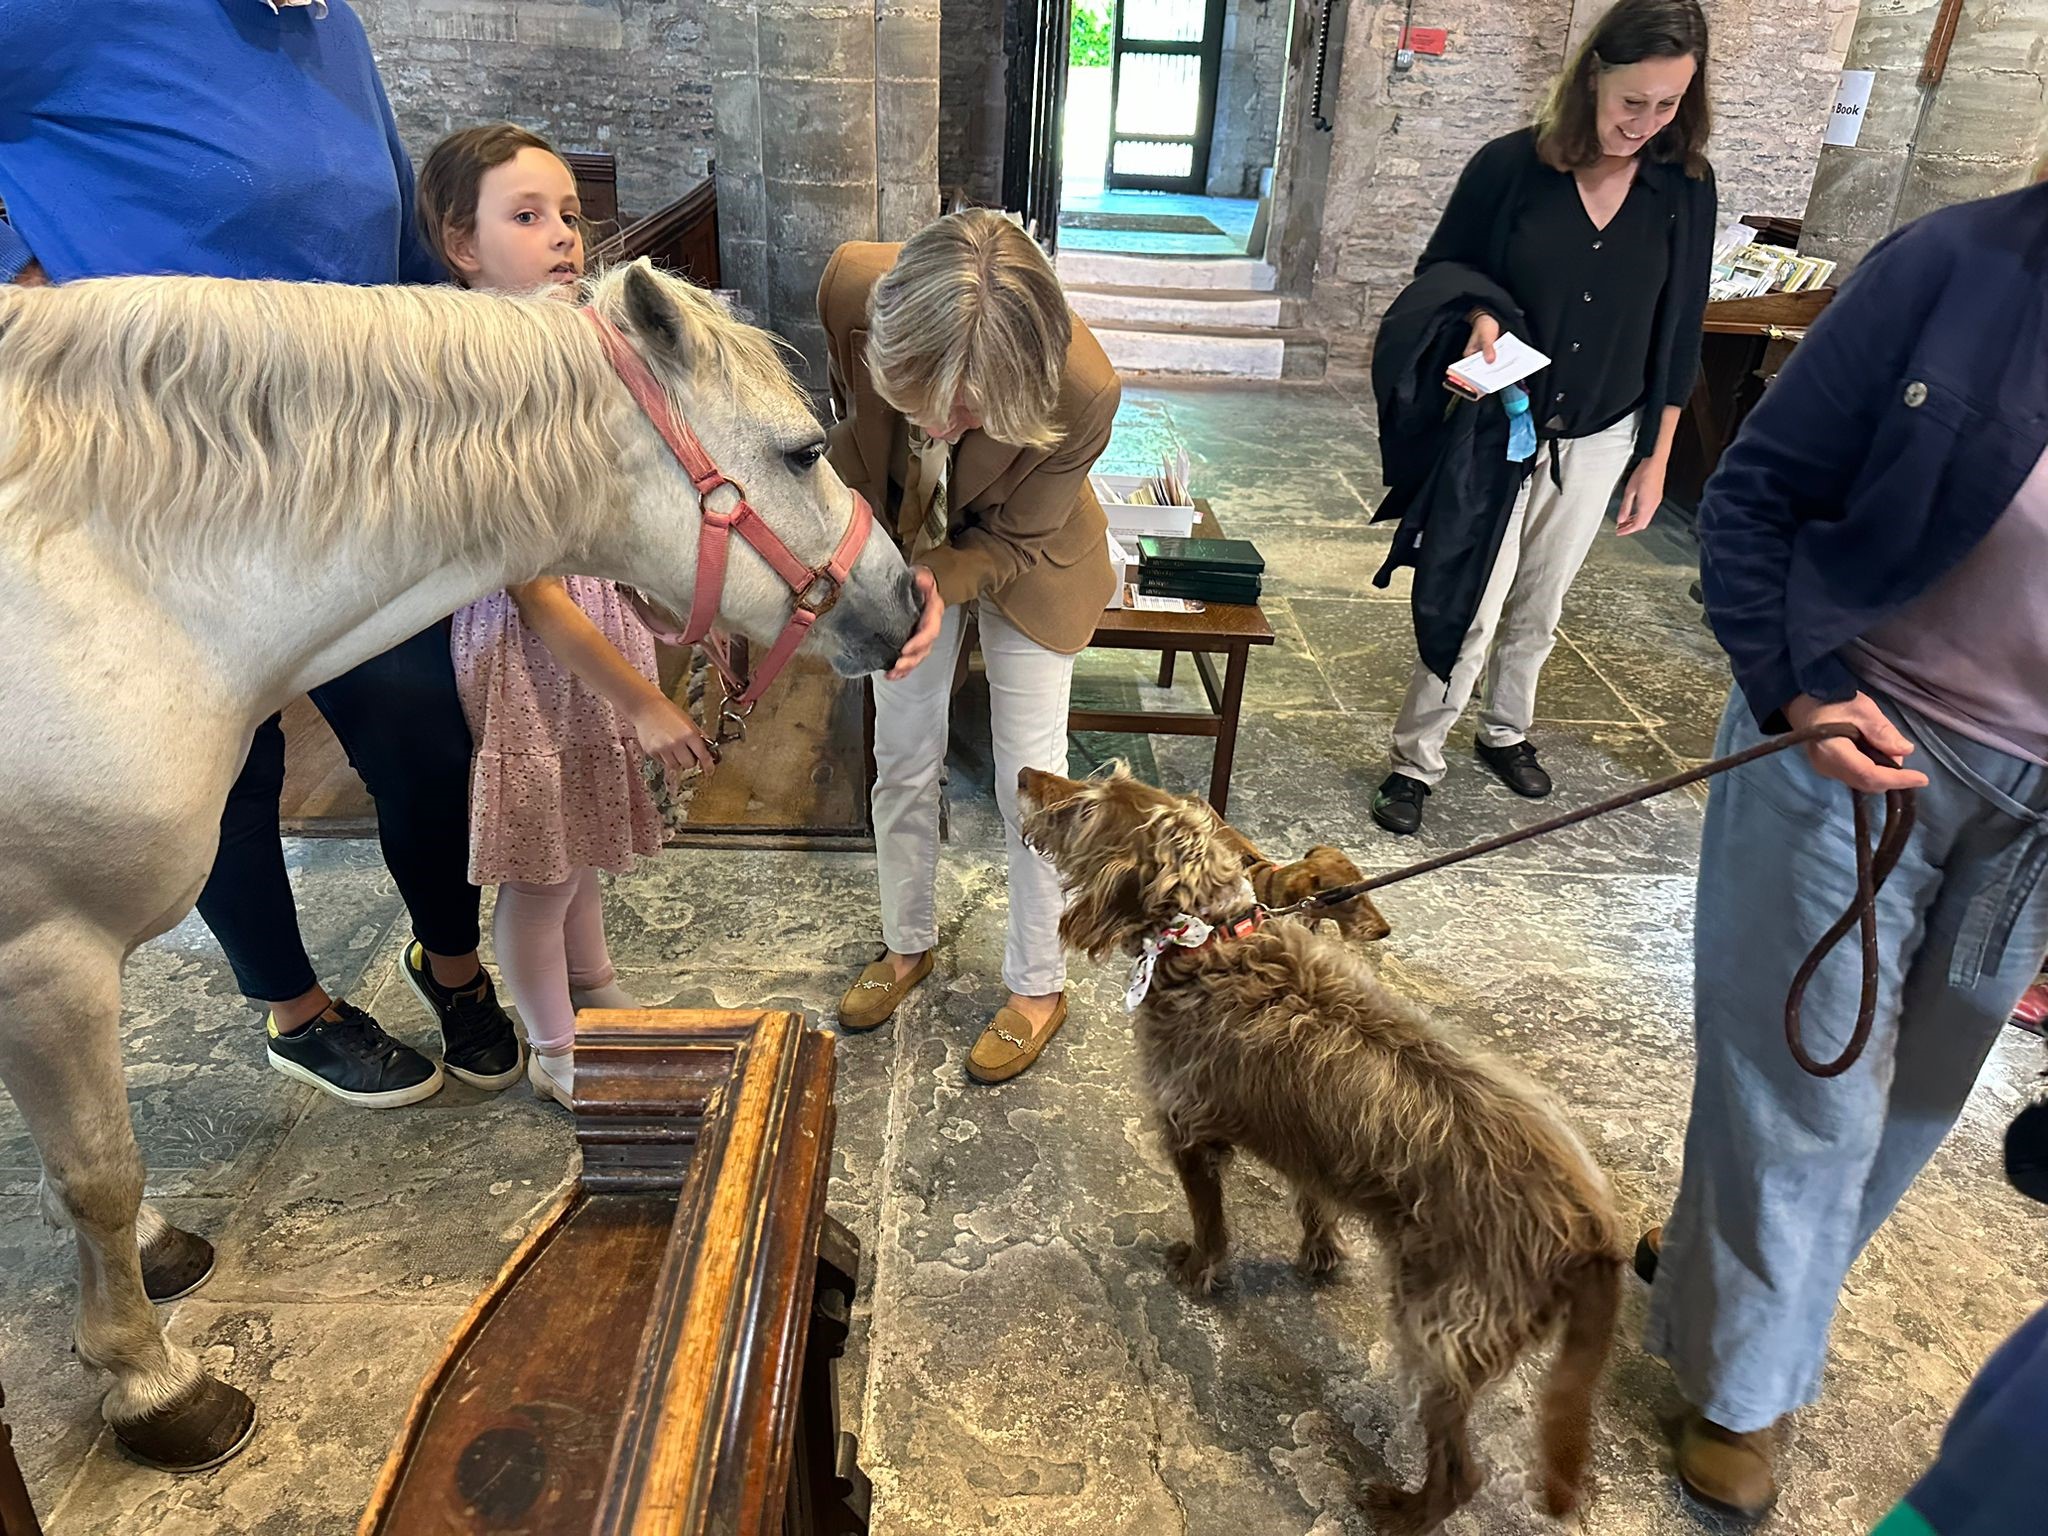 A pony and dog greet one another inside Ripple church